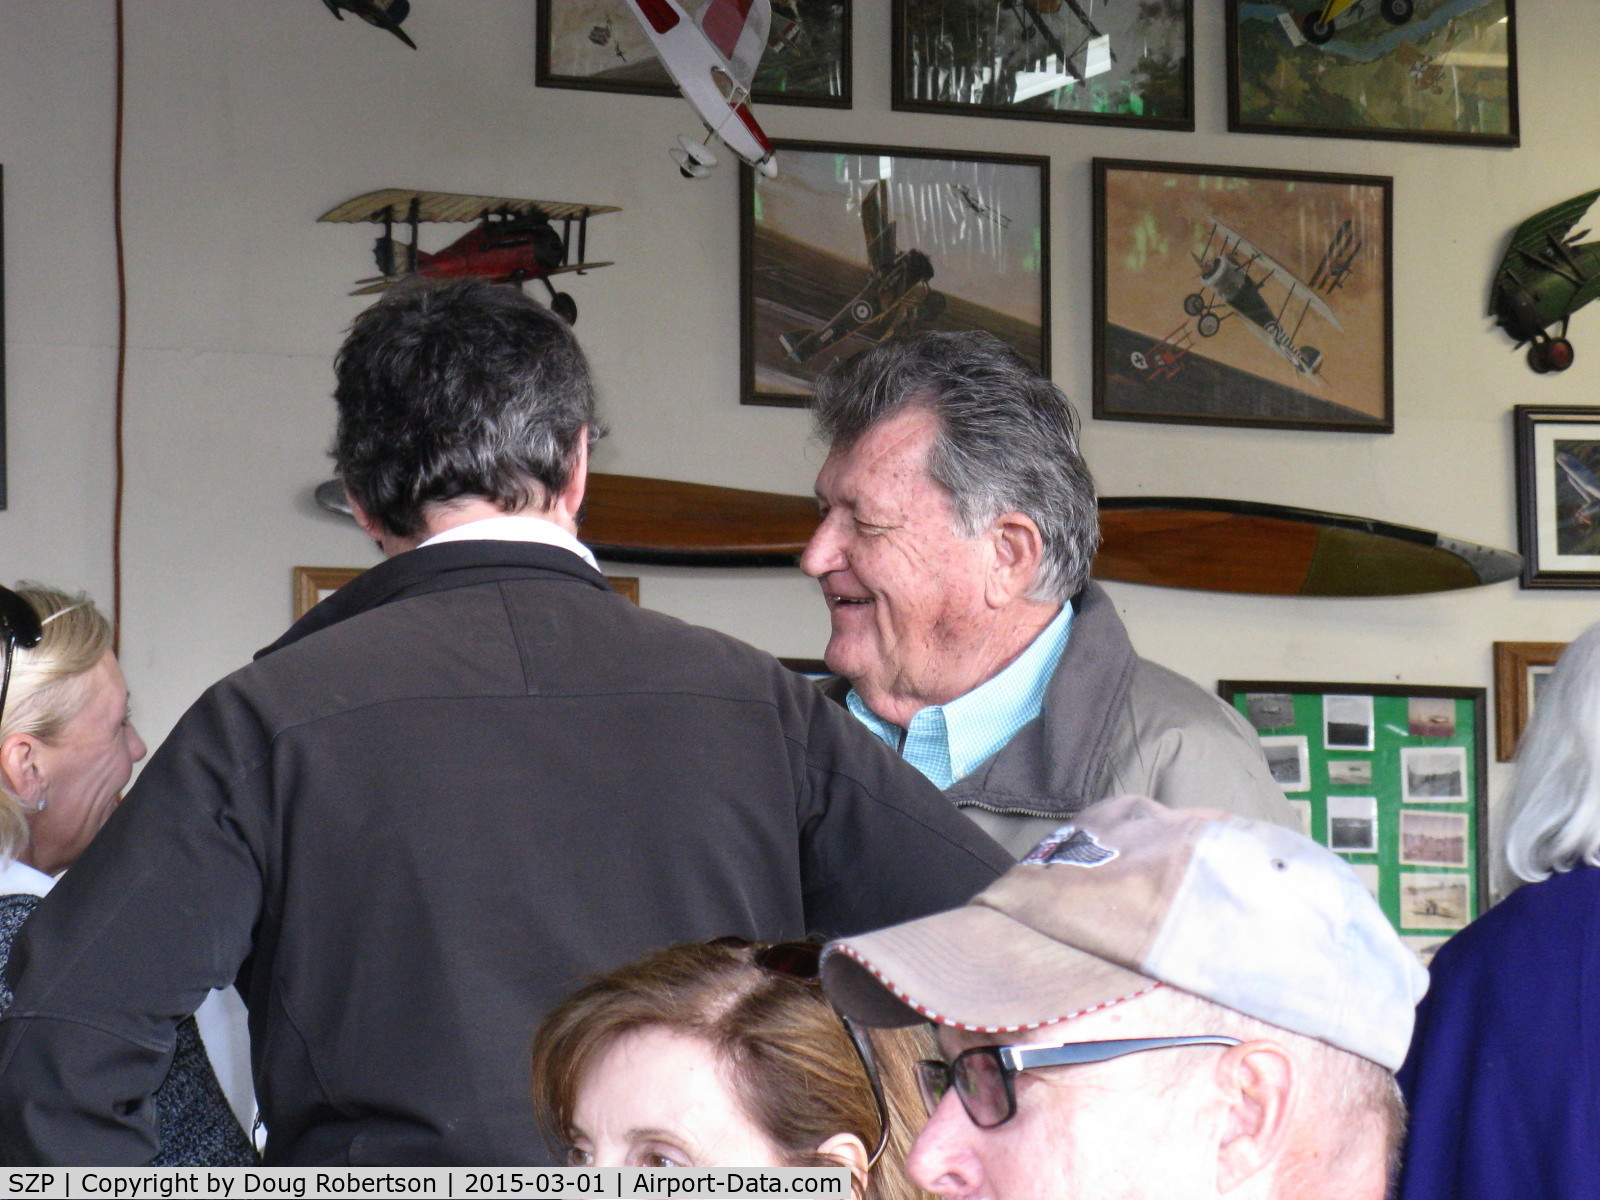 Santa Paula Airport (SZP) - Host Pat Quinn in his Bucker Museum Hangar greeting friends before the luncheon celebrating his 50 year flying FAA Wright Brothers Master Pilot Award. Pat has owned an incredible 55 airplanes in that time!!!